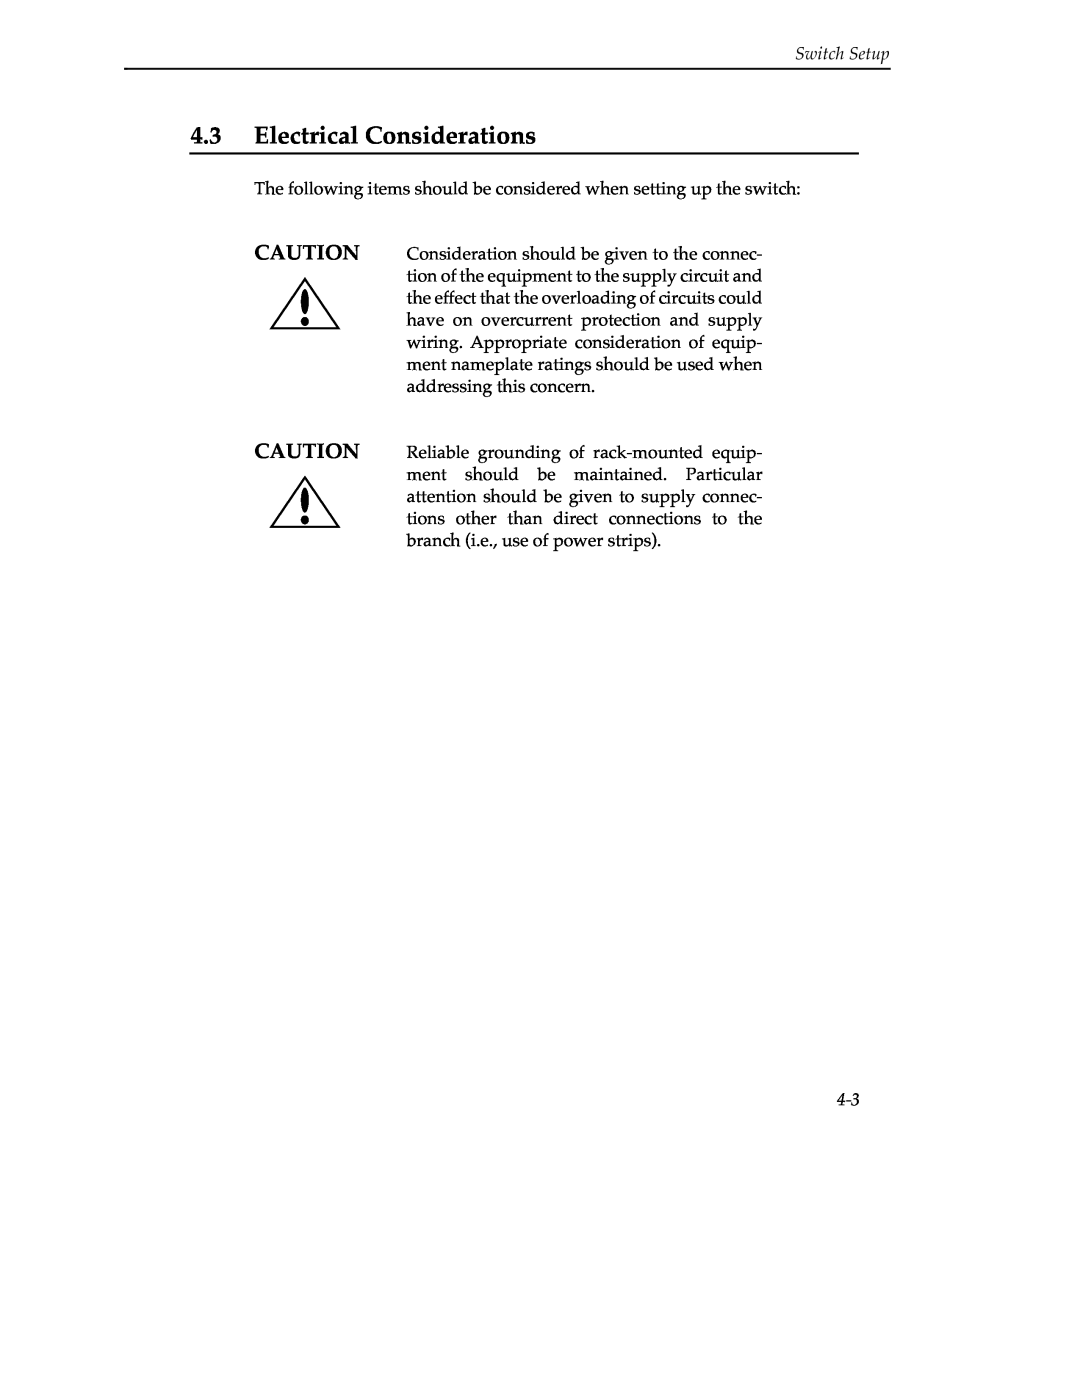 Cabletron Systems 9A000 manual Electrical Considerations, Switch Setup 